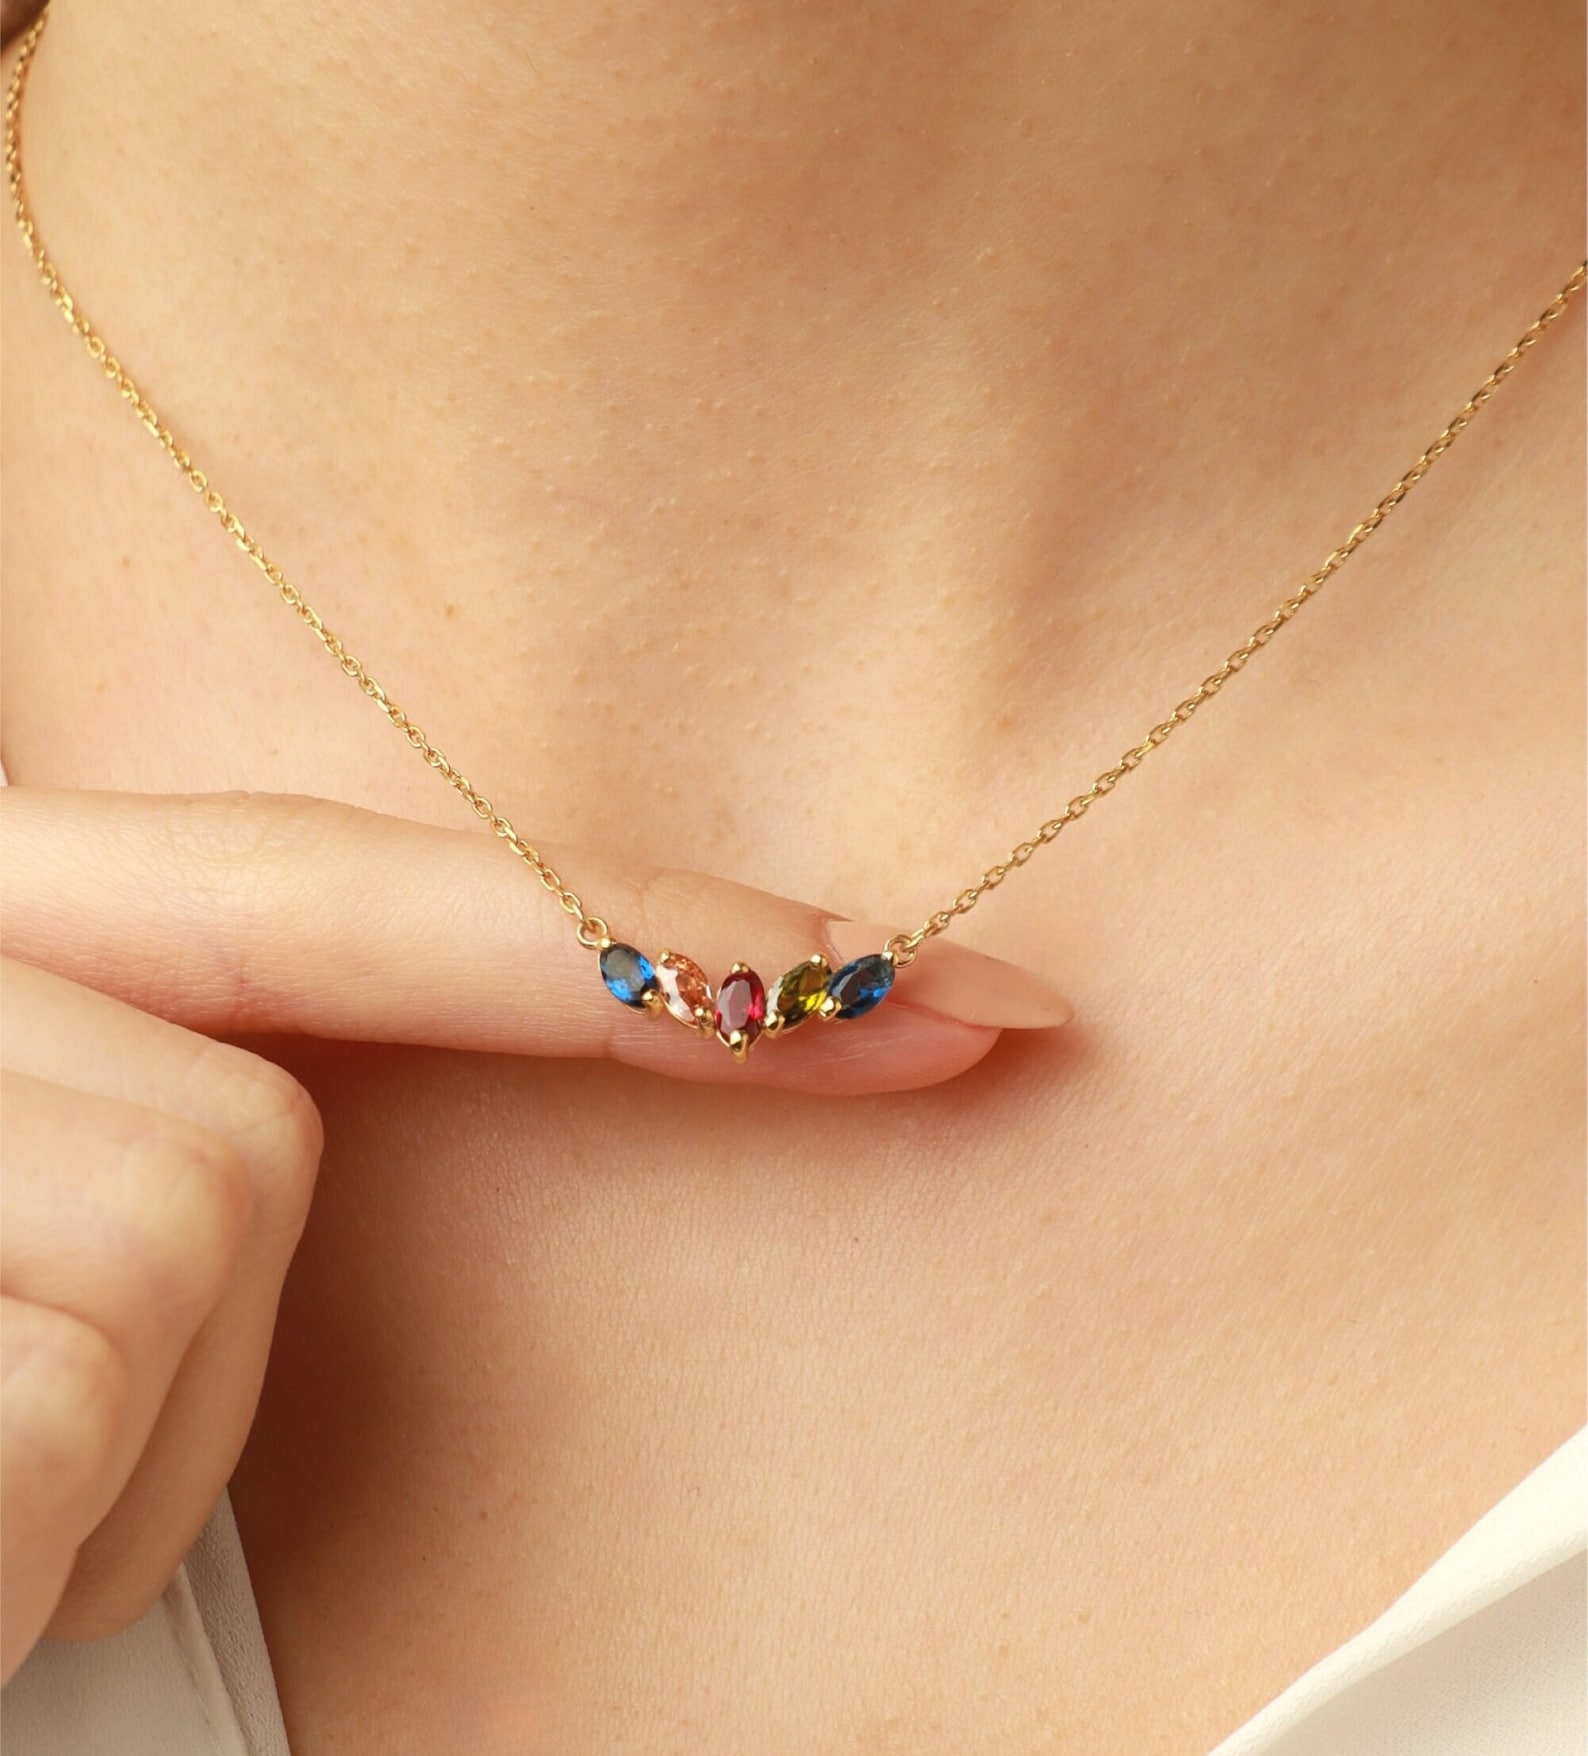 A birthstone necklace with 5 coloured stones on a gold plated chain